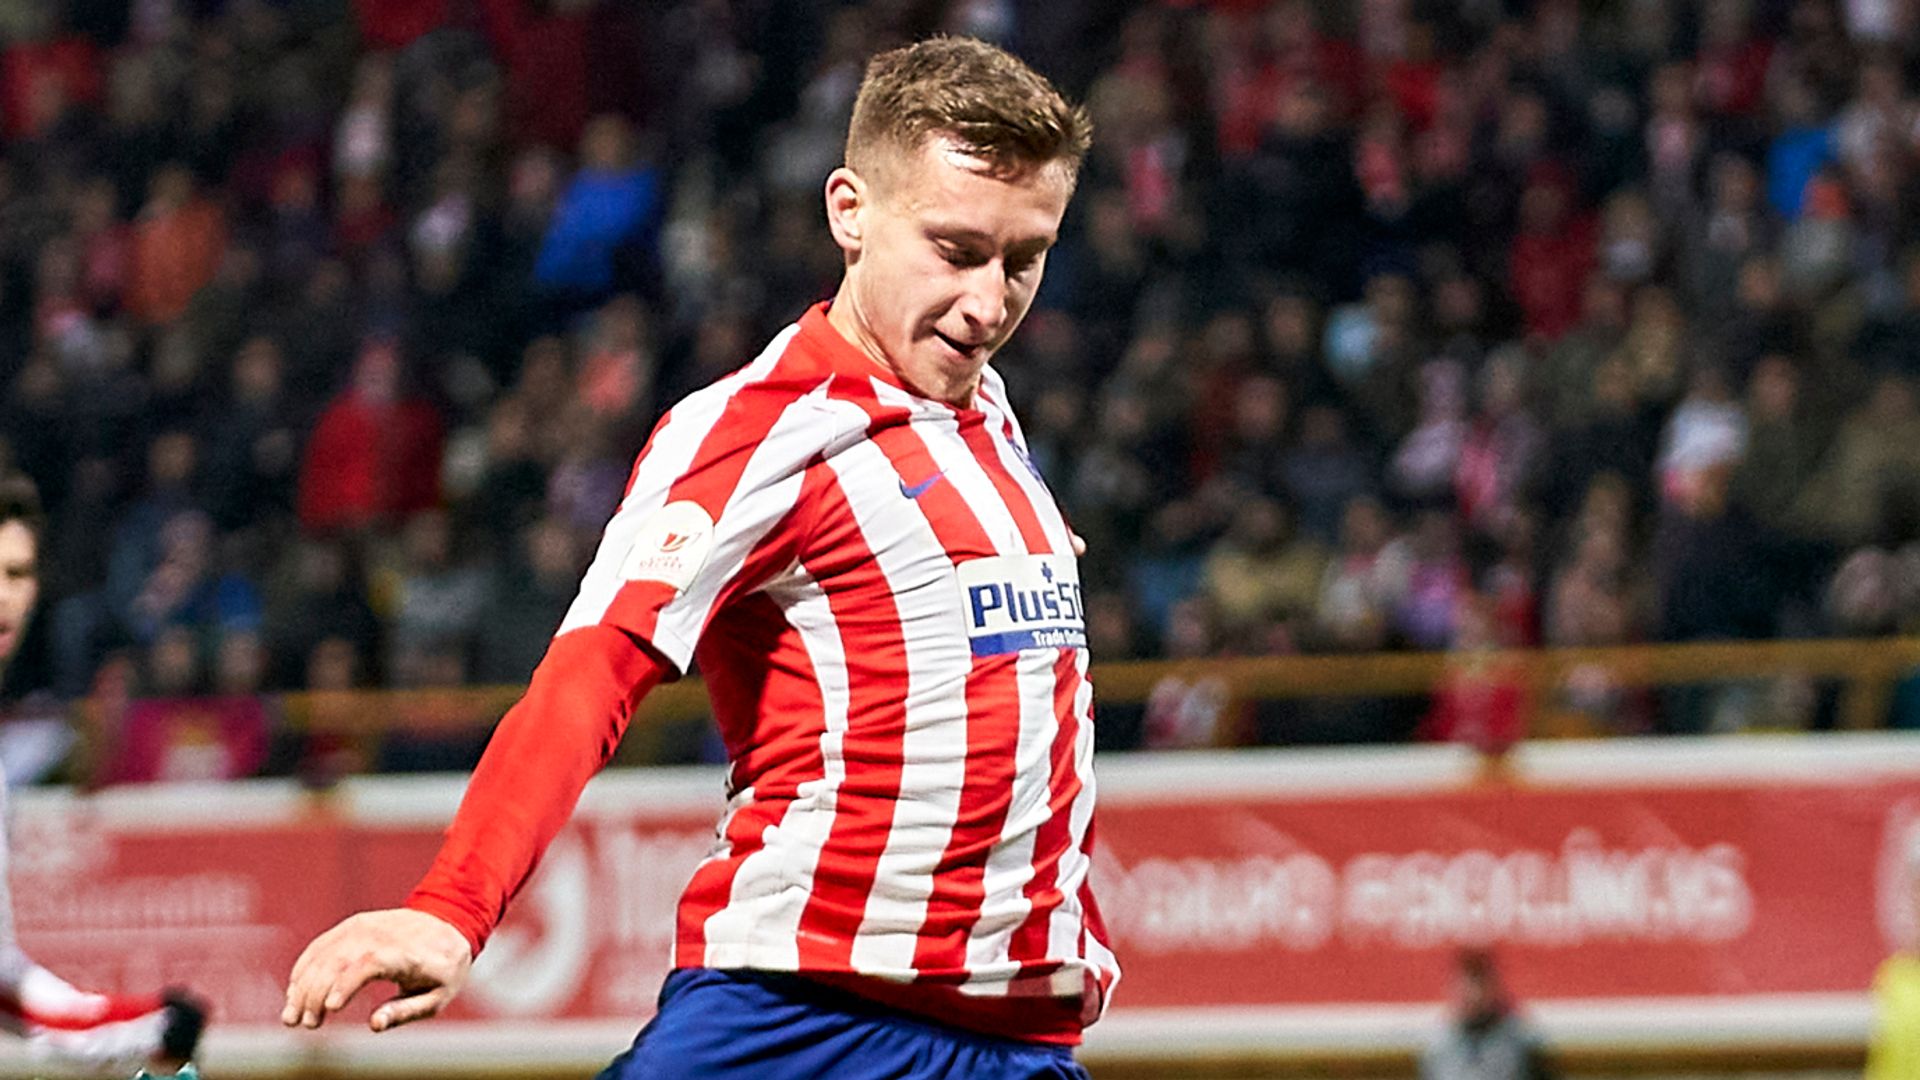 Celtic could move for Atletico's Saponjic